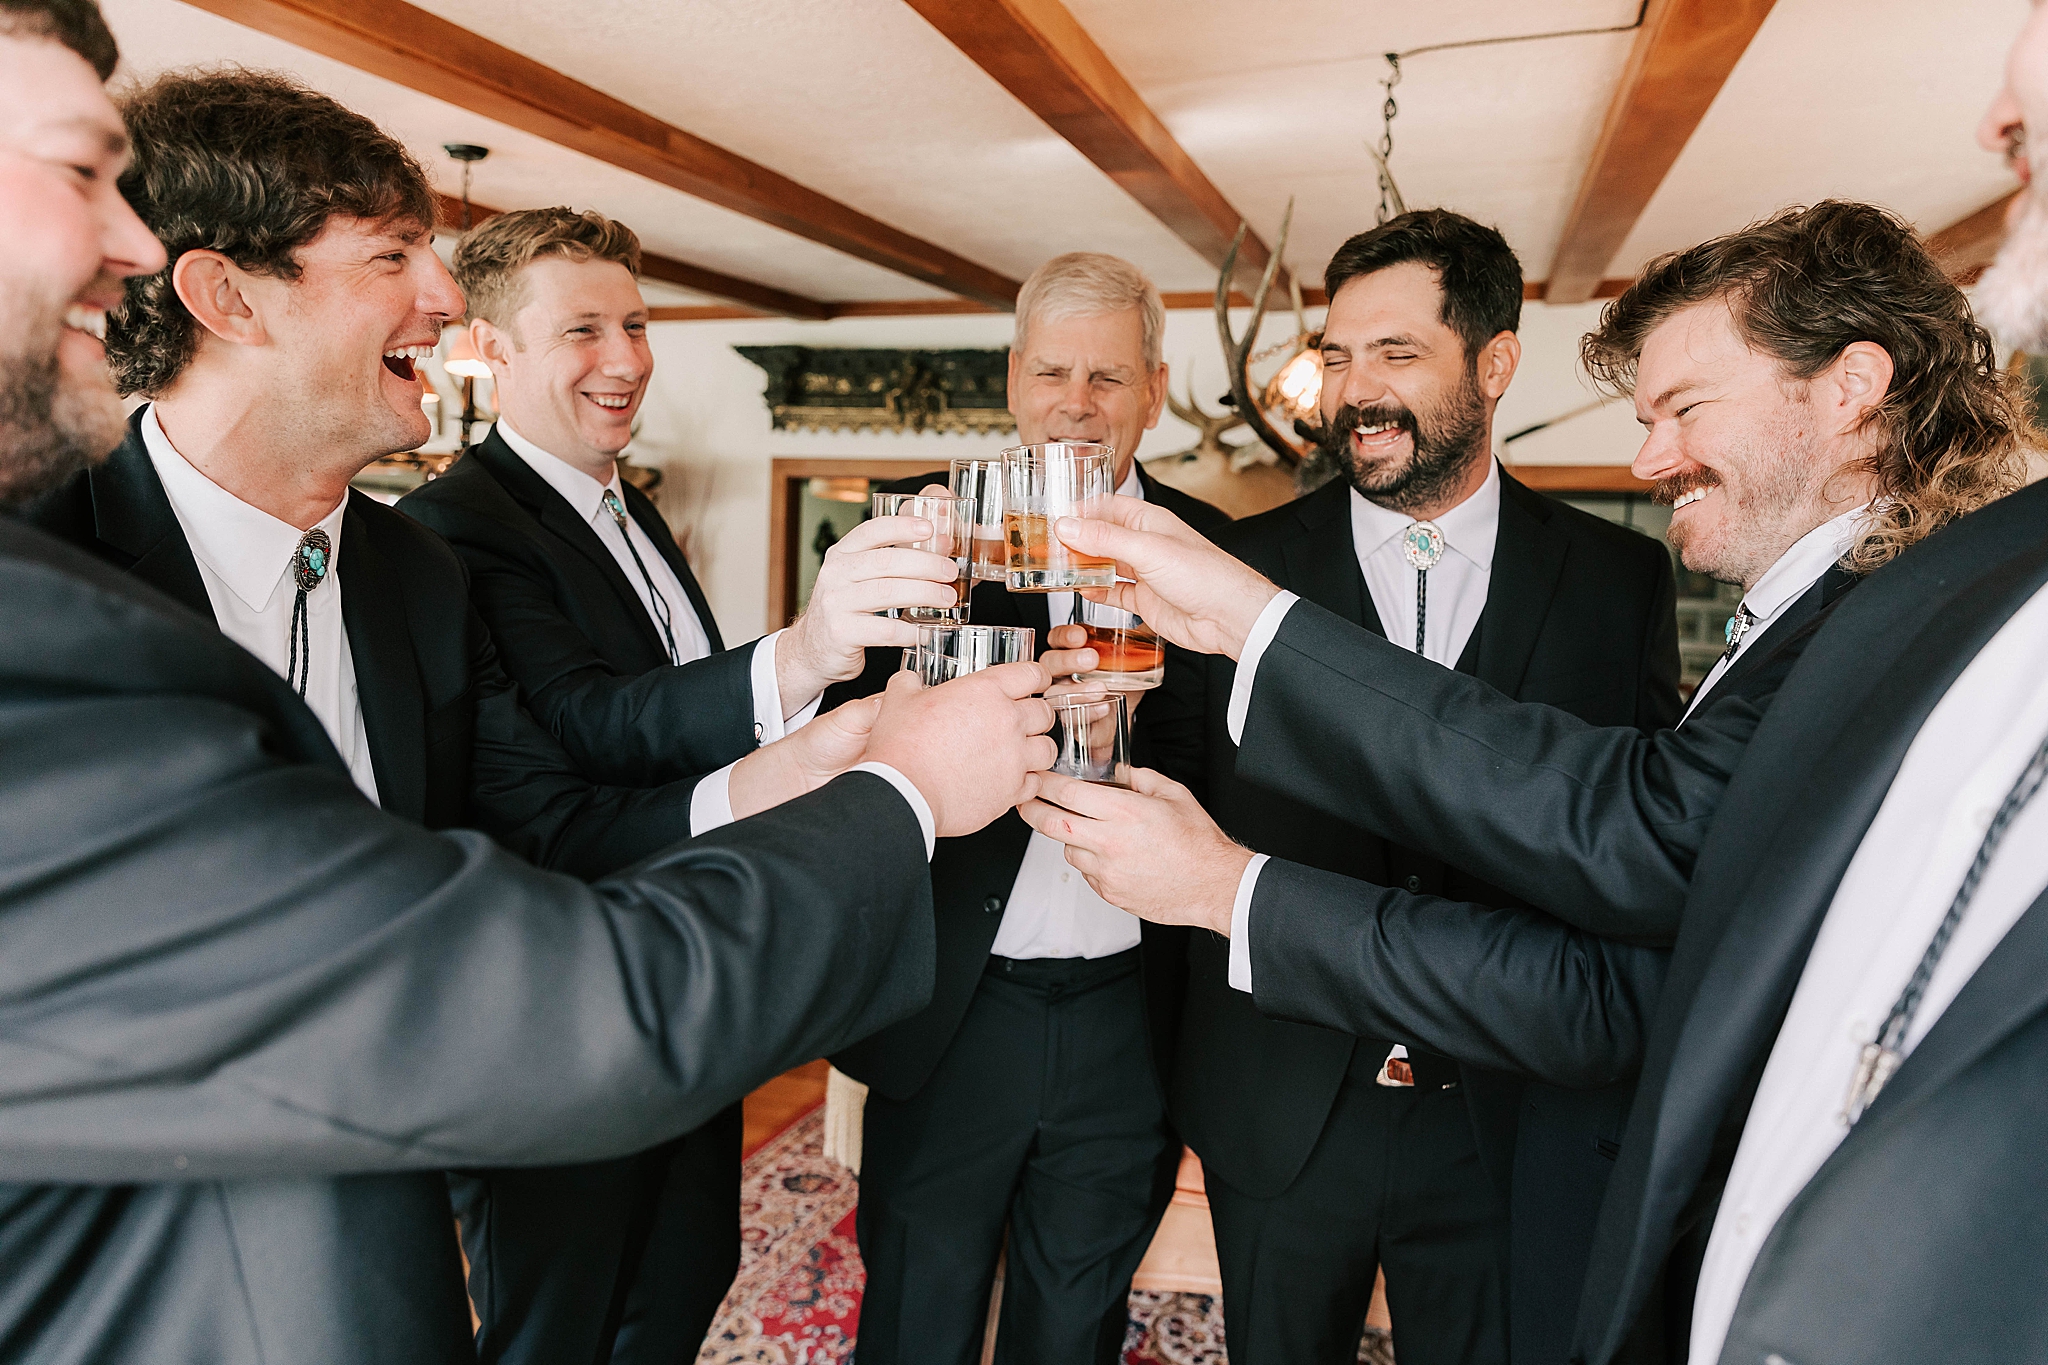 groom and groomsmen at a jackson hole ranch wedding taken by photographer adrian wayment.